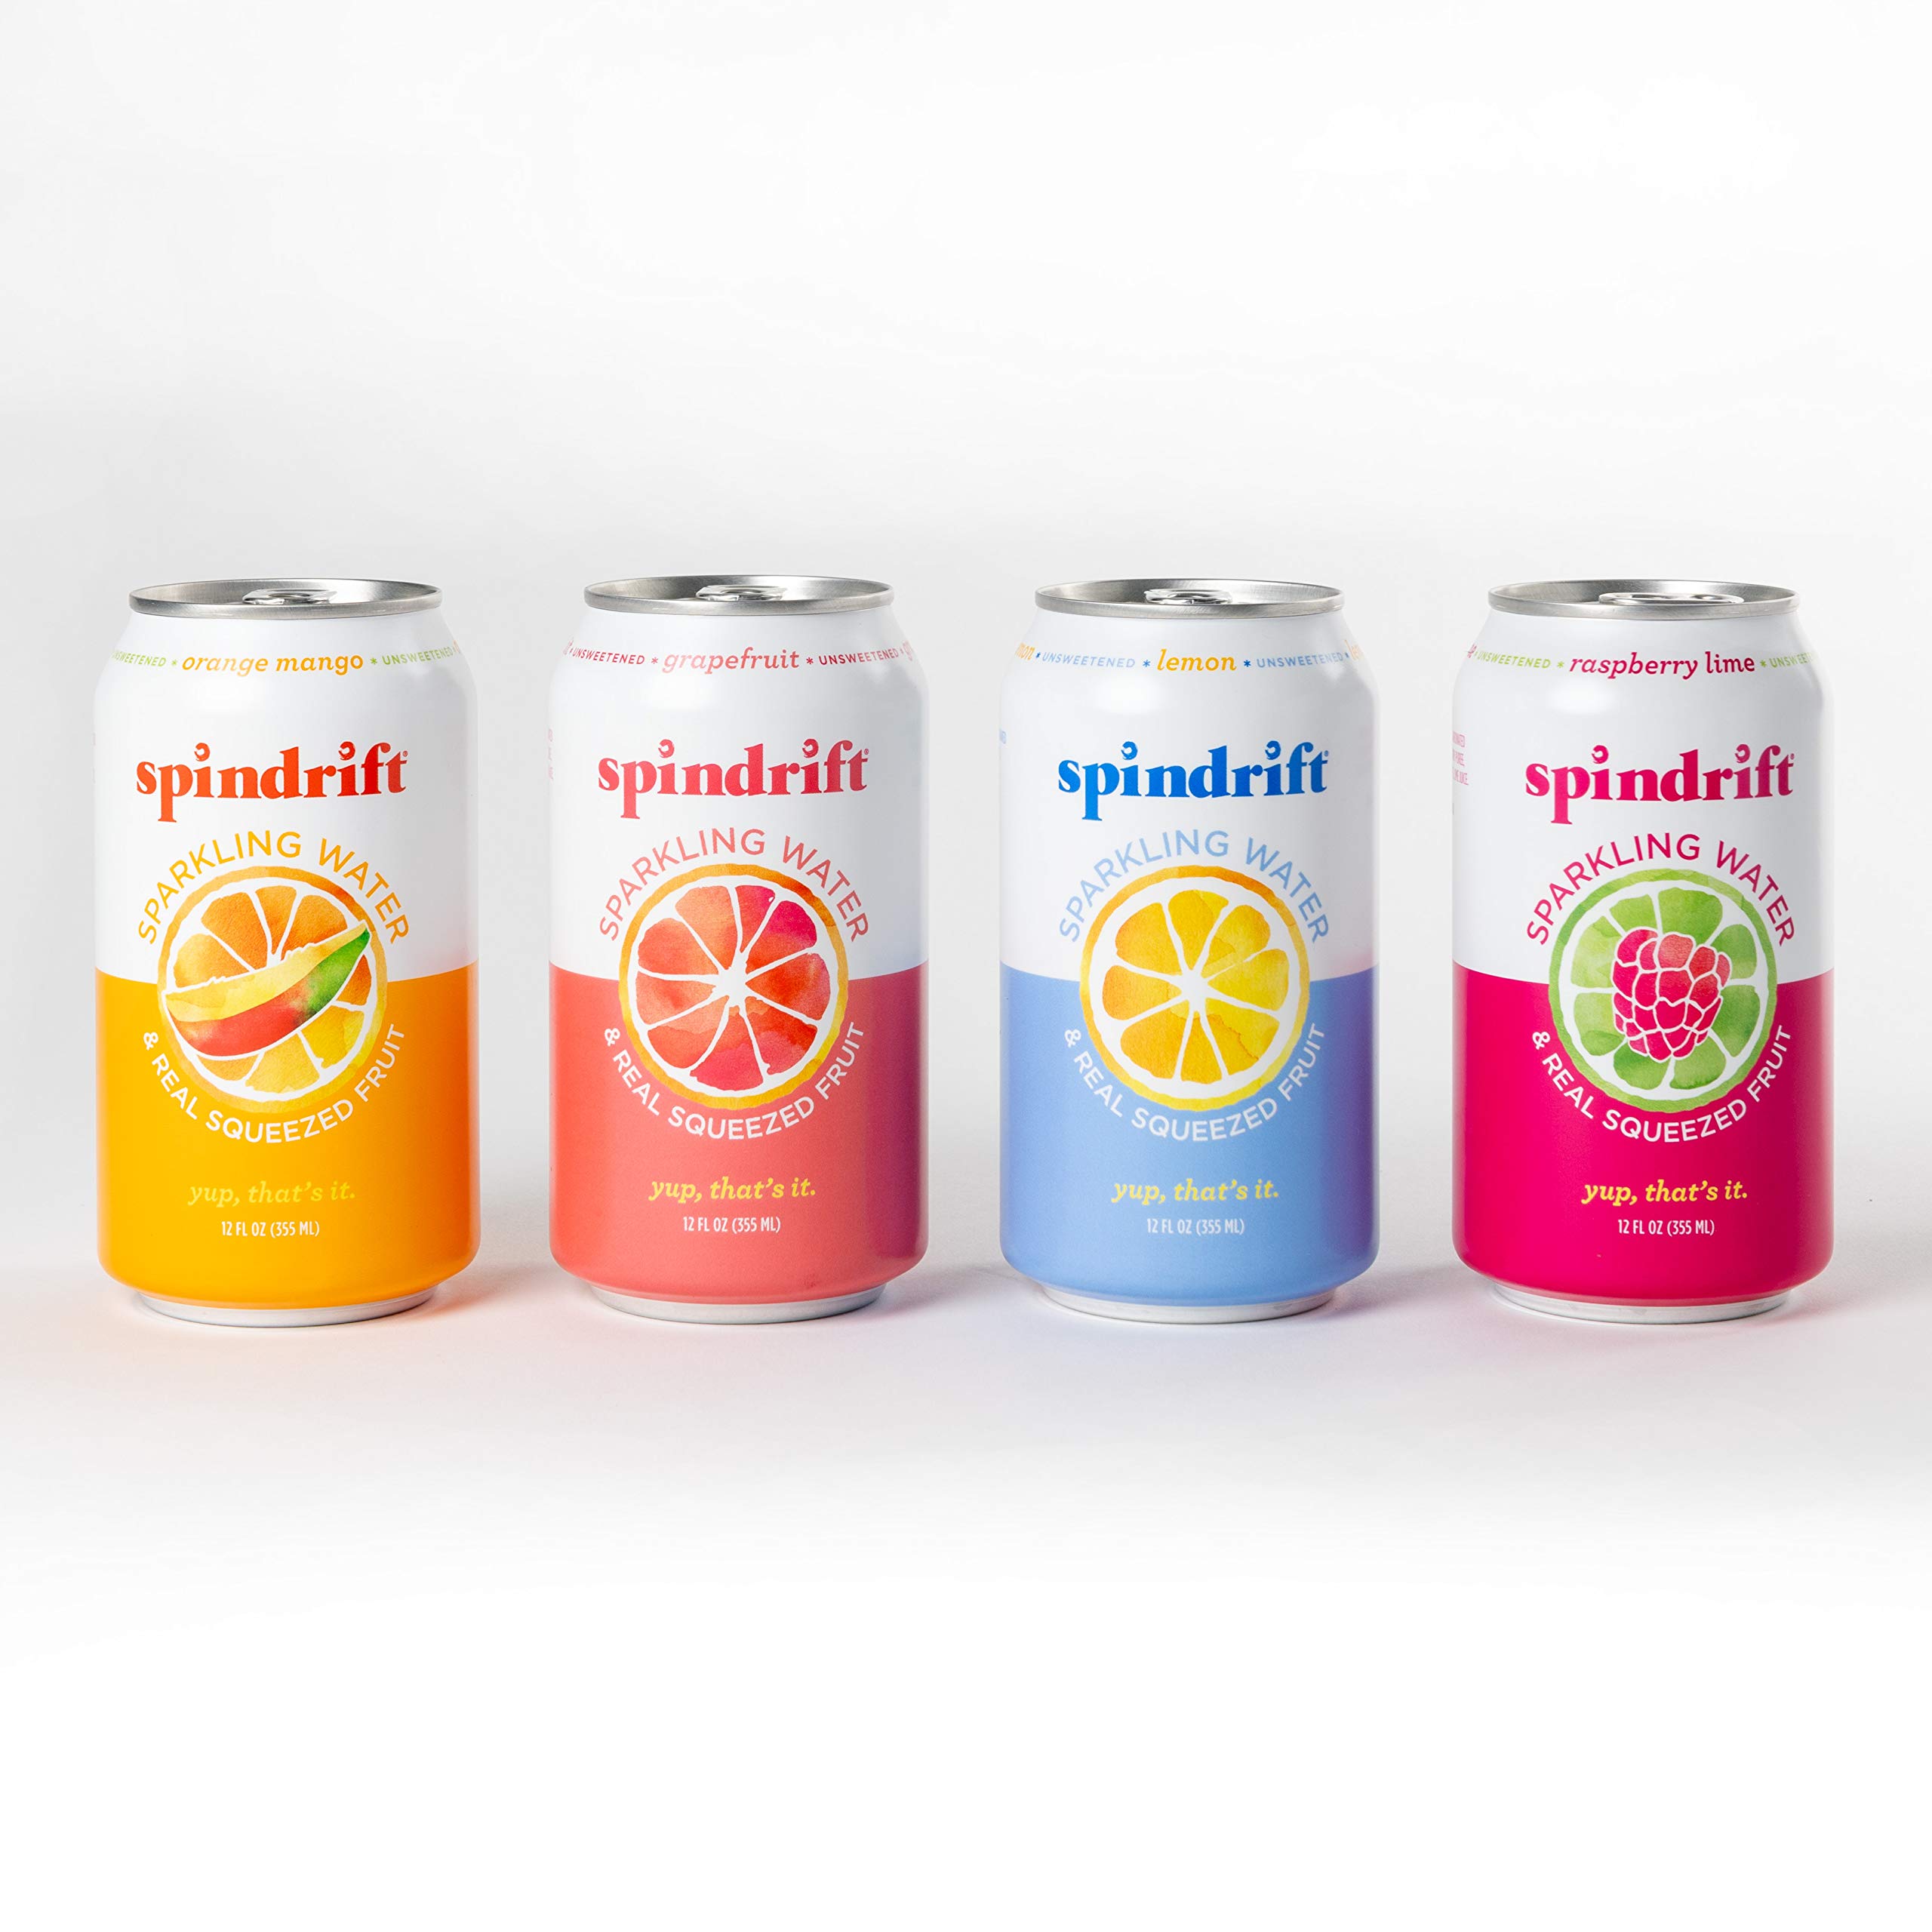 Spindrift Sparkling Water, 4 Flavor Variety Pack, Made with Real Squeezed Fruit, 12 Fl Oz (Pack of 20) - $11.86